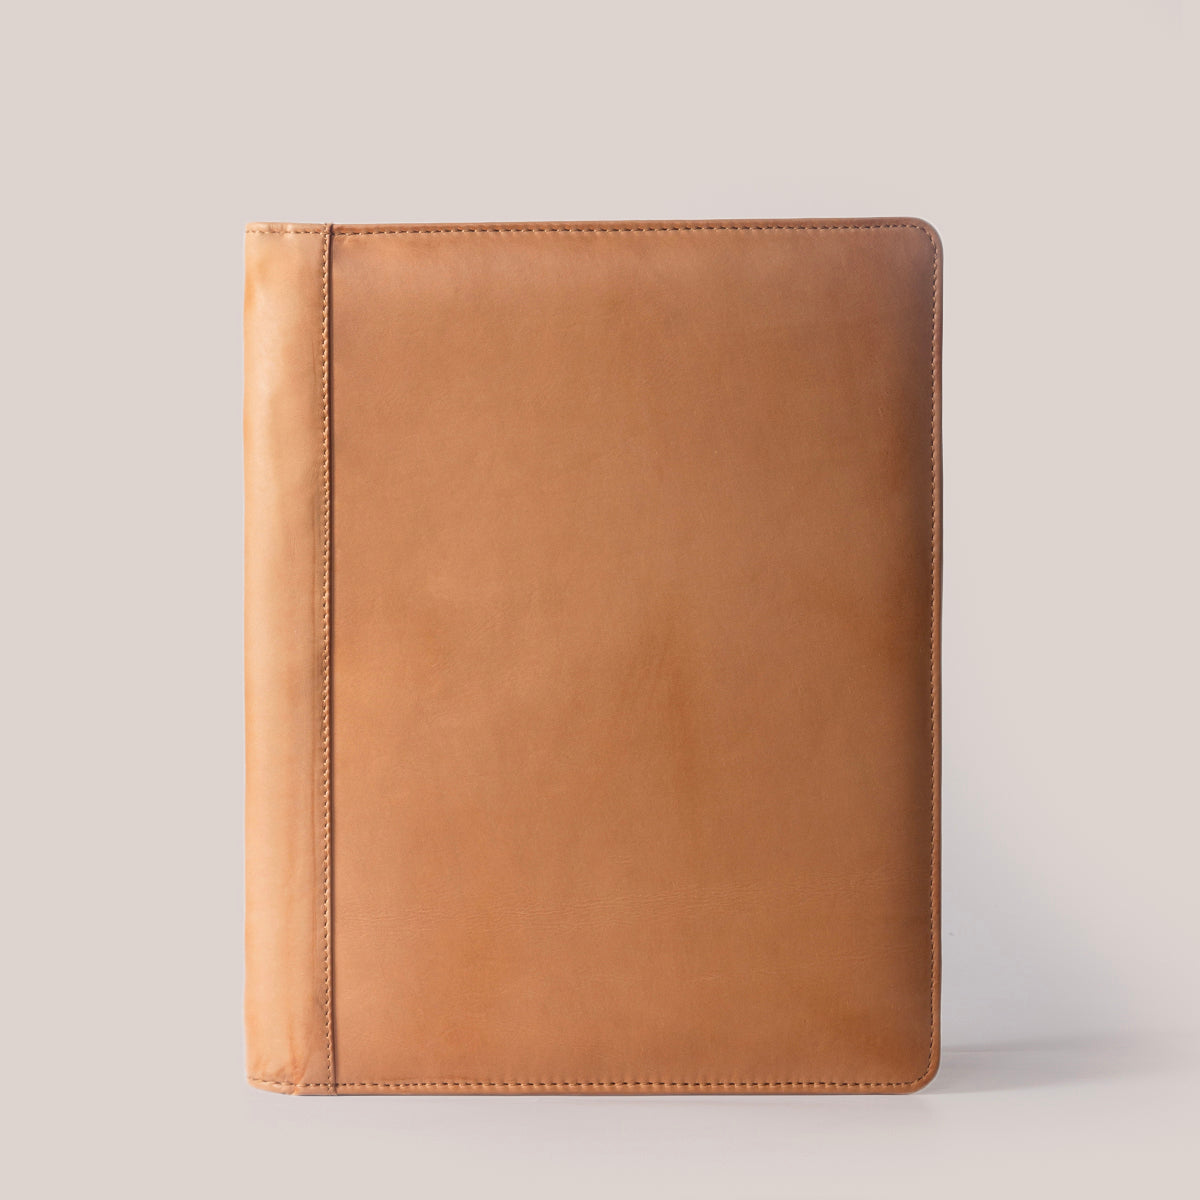 Shop Aldona A4 Leather Padfolio Folder Online at the Best Price